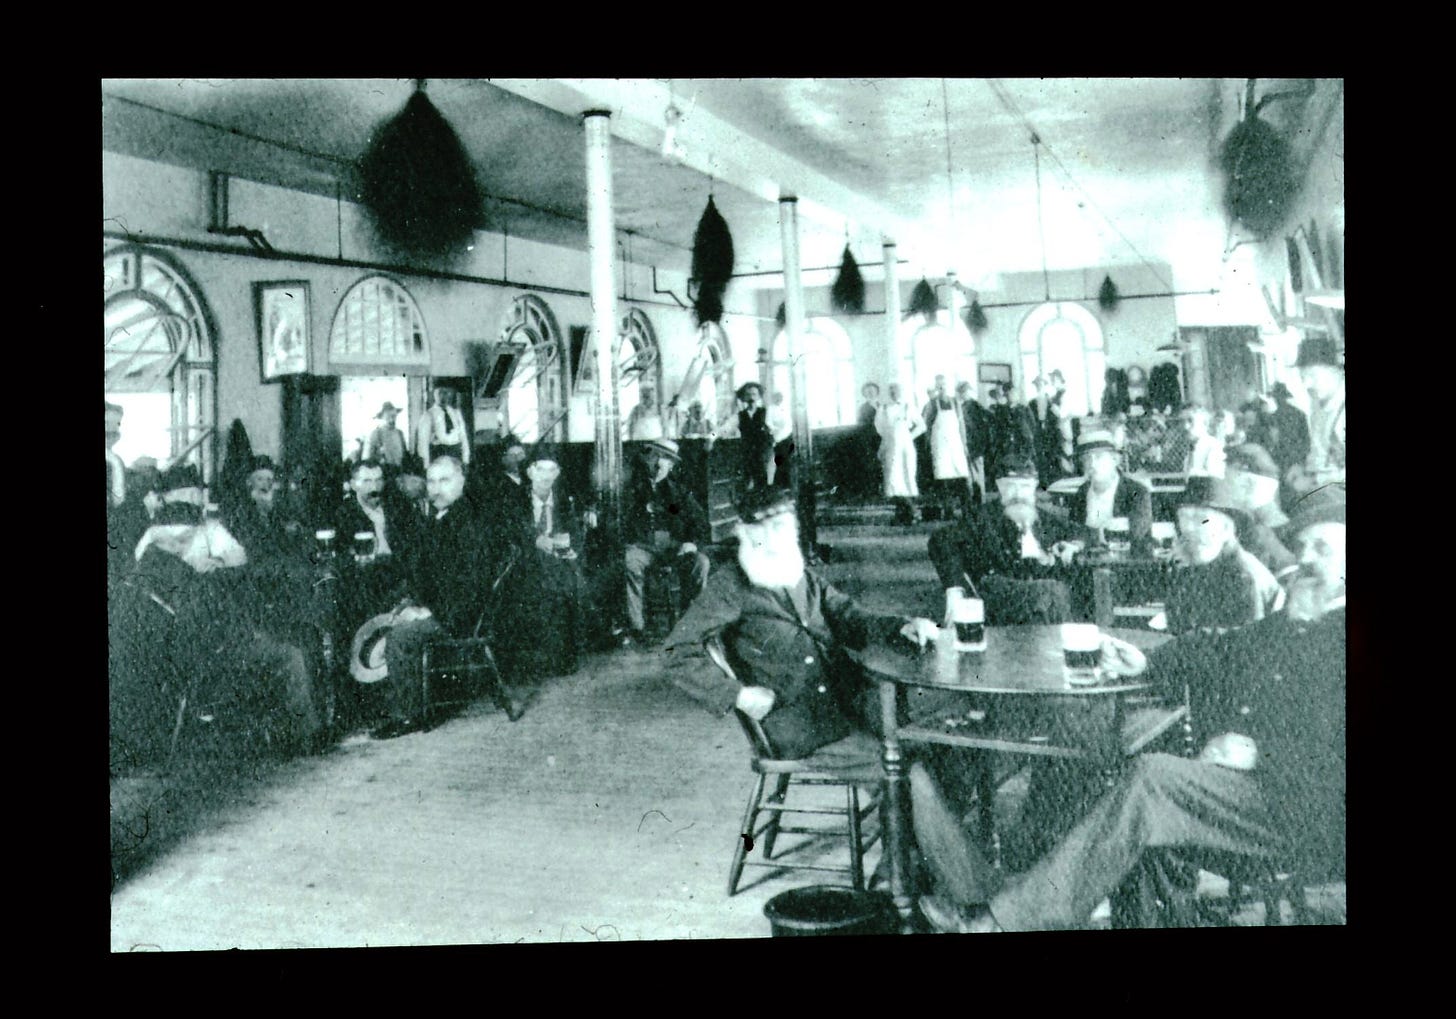 Residents drinking in the beer hall in the Western Branch-NHDVS, Leavenworth, KS, Recreation Hall (known as the “dugout”) sometime between 1898 and 1907 (VA photo)